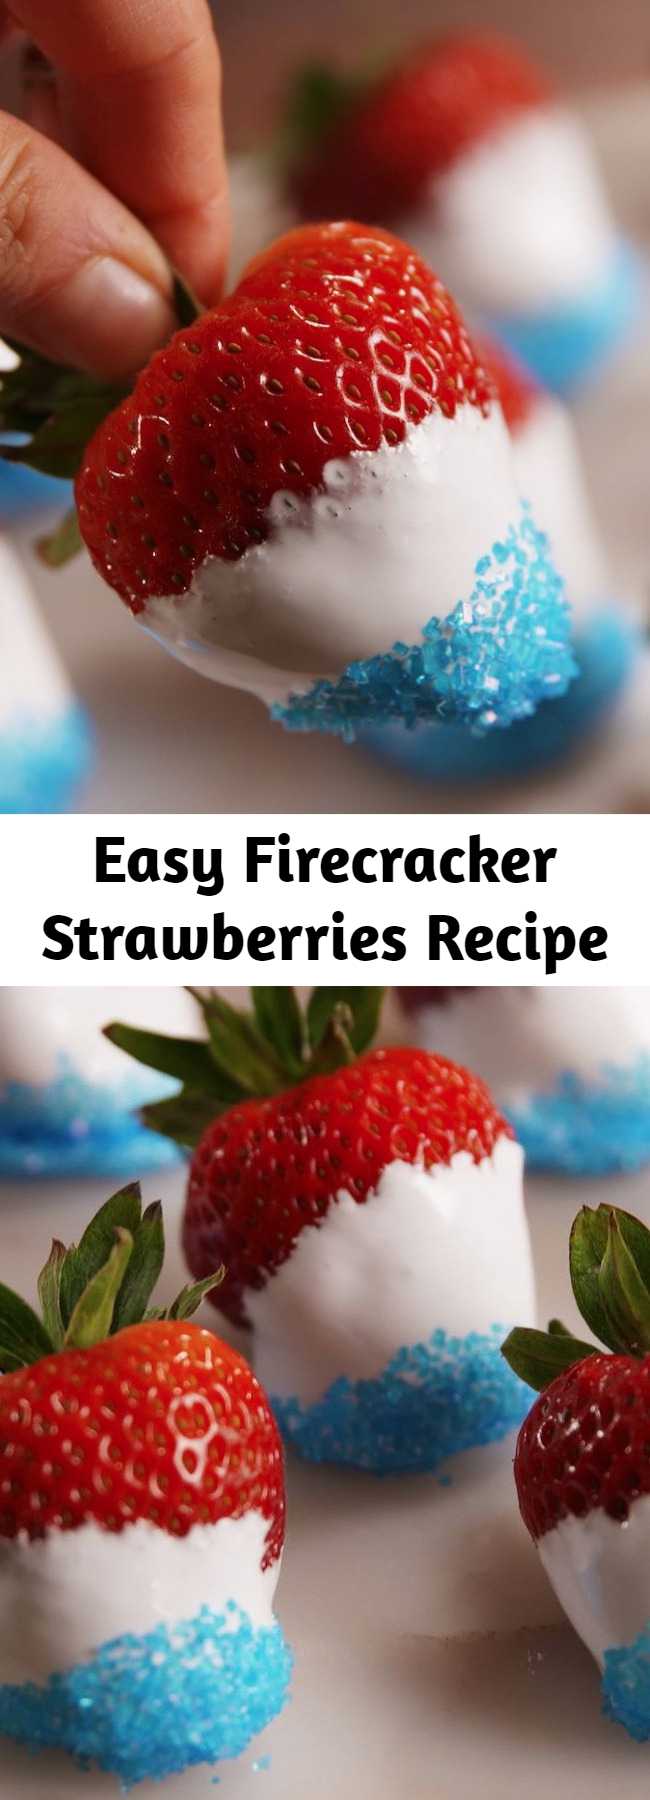 Easy Firecracker Strawberries Recipe - These firecracker strawberries are a no brainer for any fourth of July party. These Red, White, and Blue Desserts Will Get More Attention Than The Fireworks.